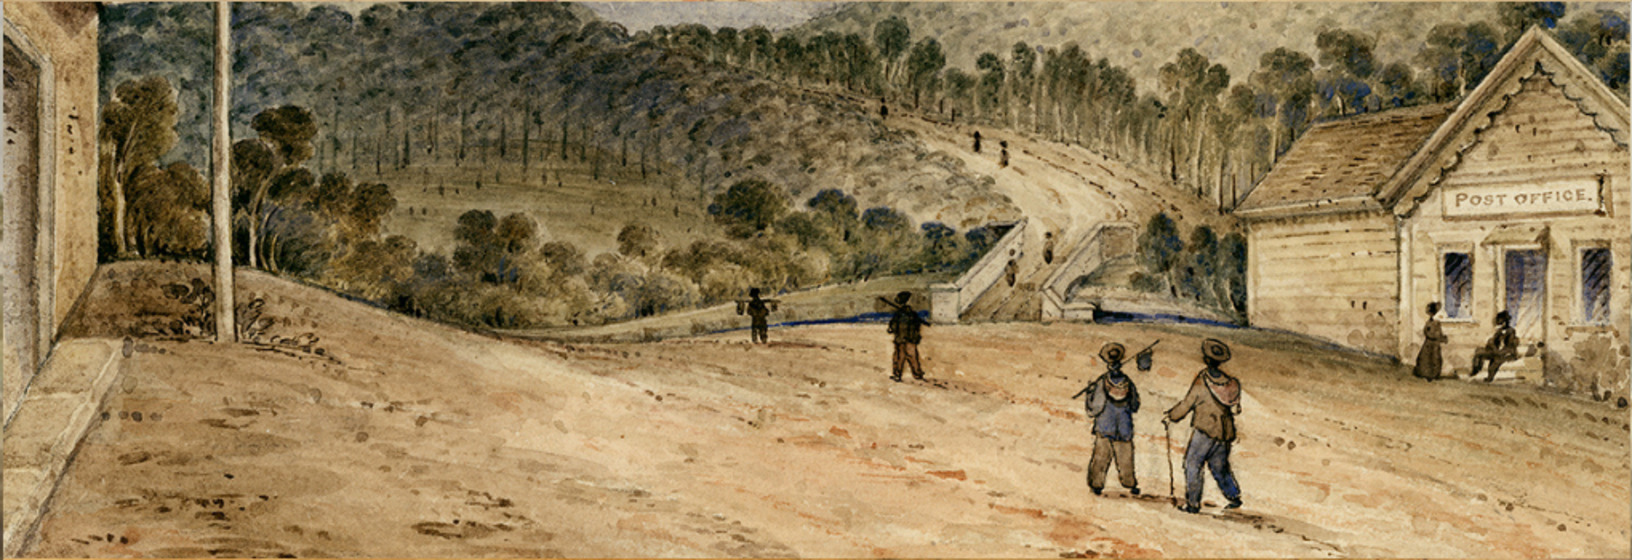 Watercolour, Buckland near the camp, rolling hills landscape with people walking down a path